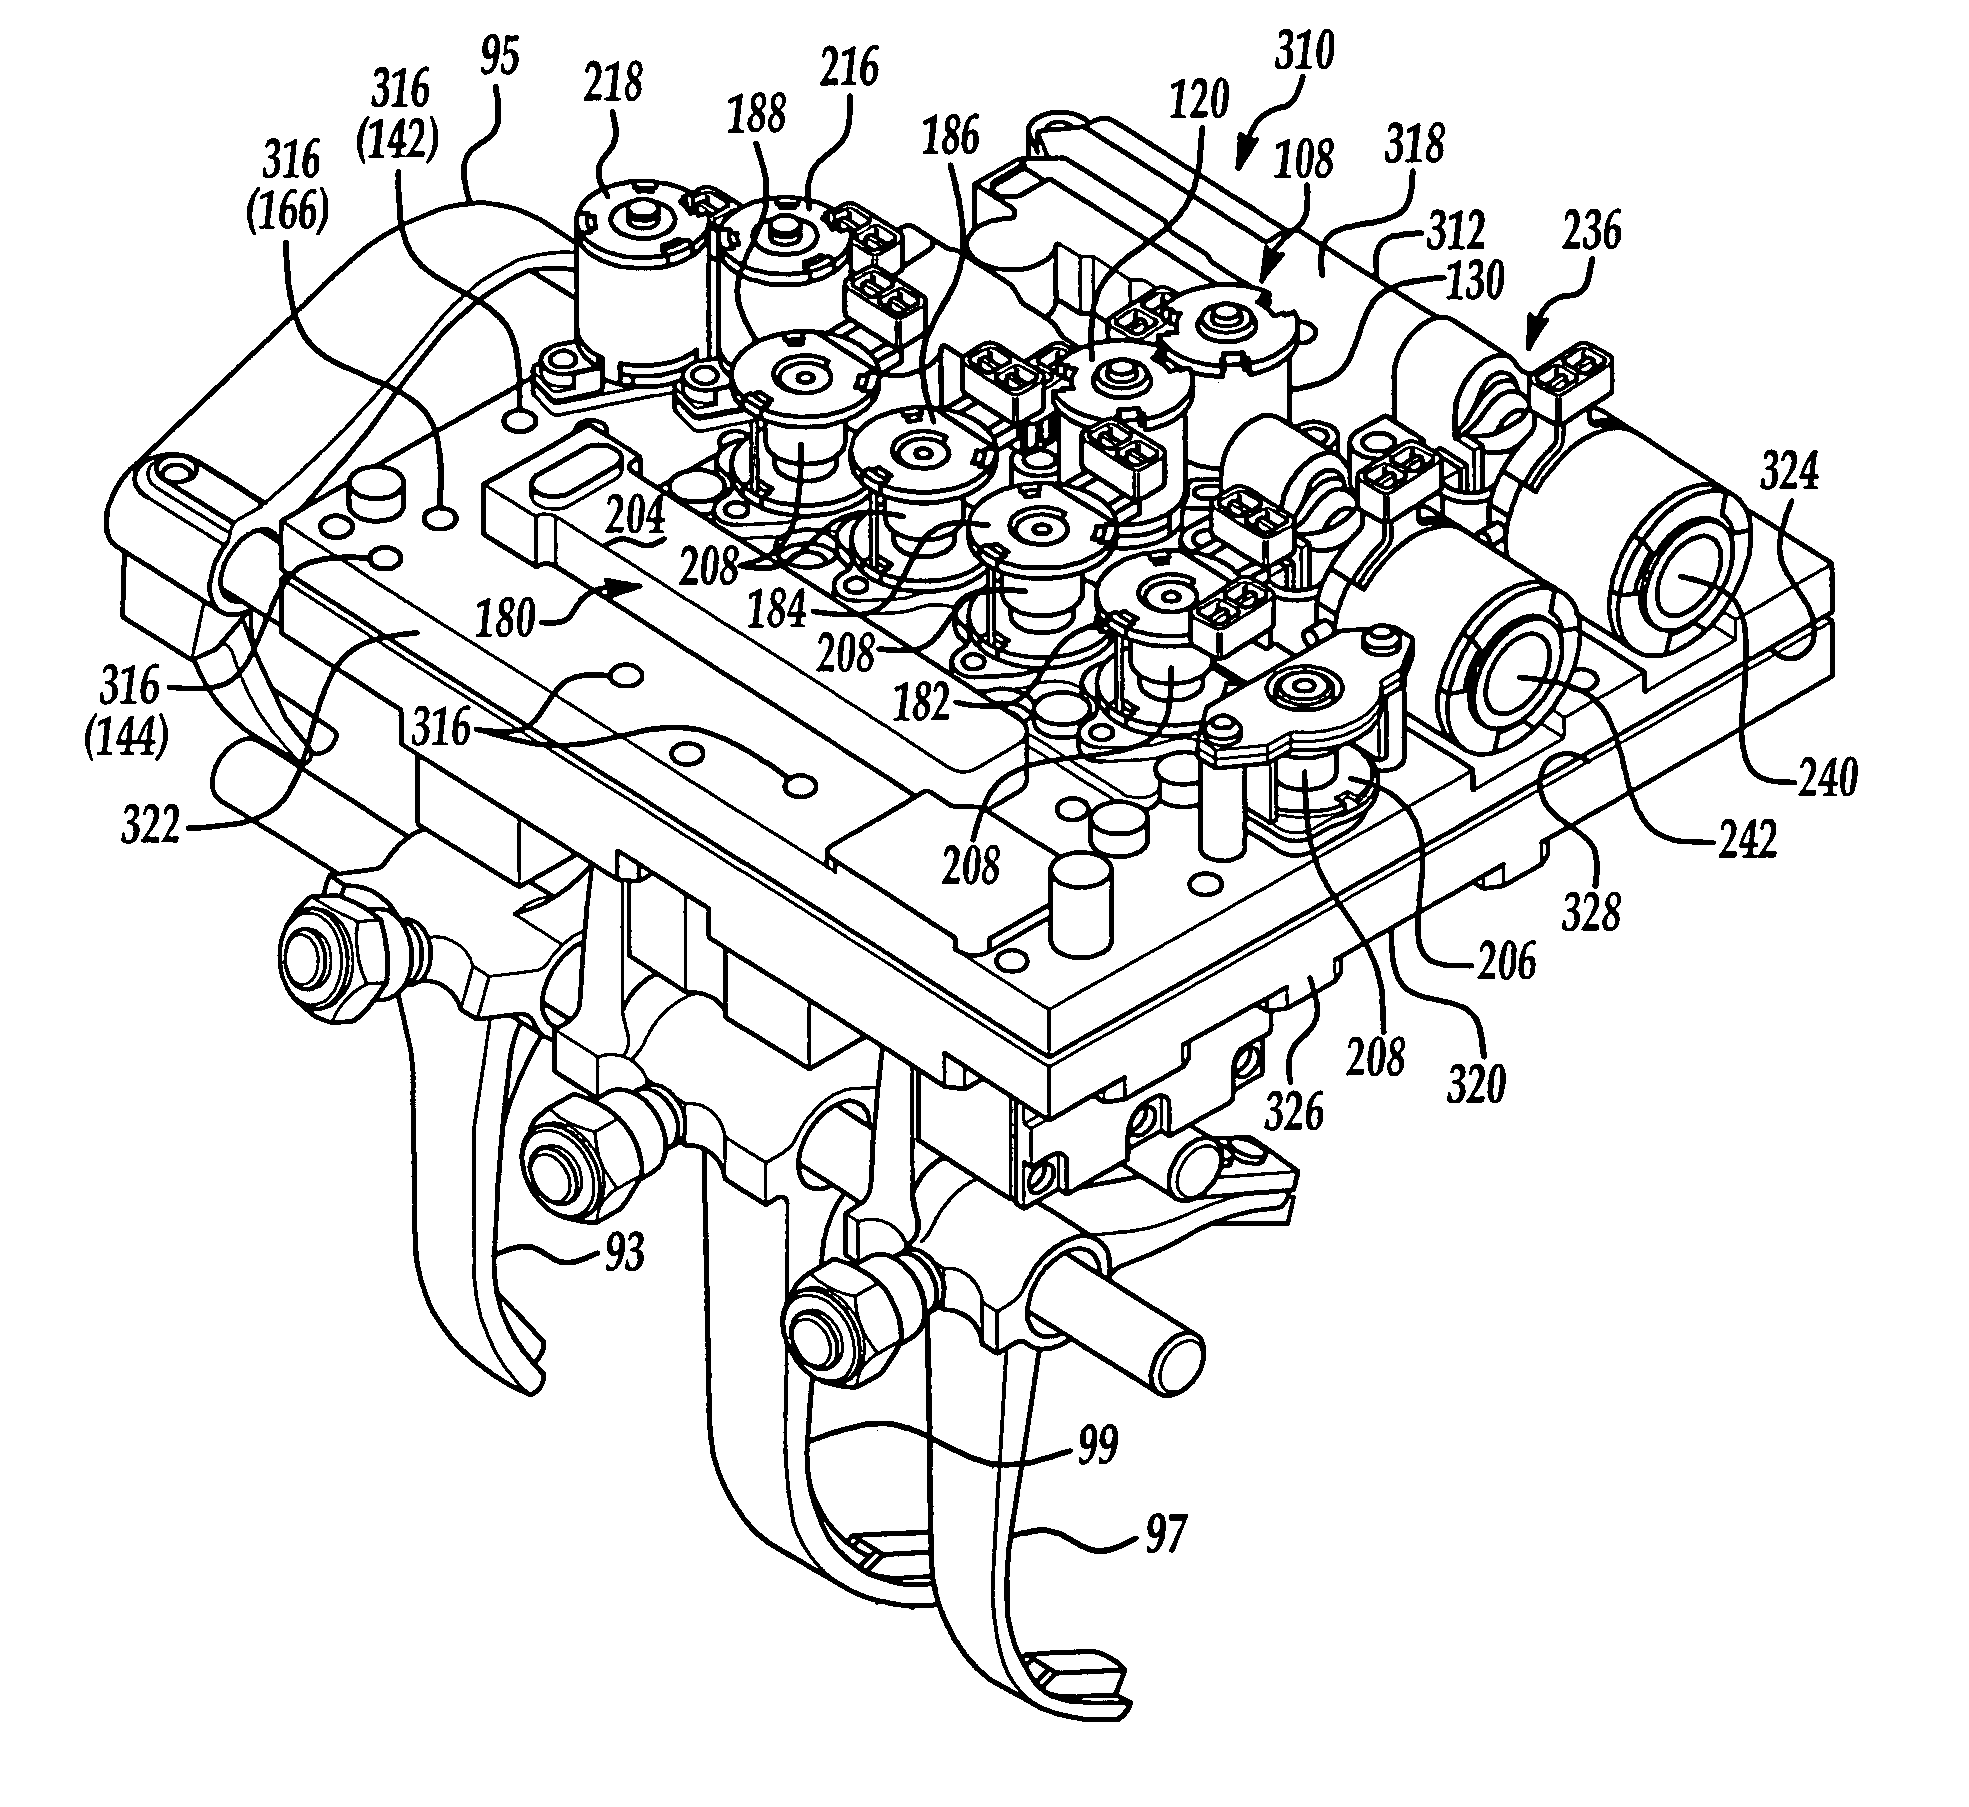 Integrated control module for a dual clutch transmission